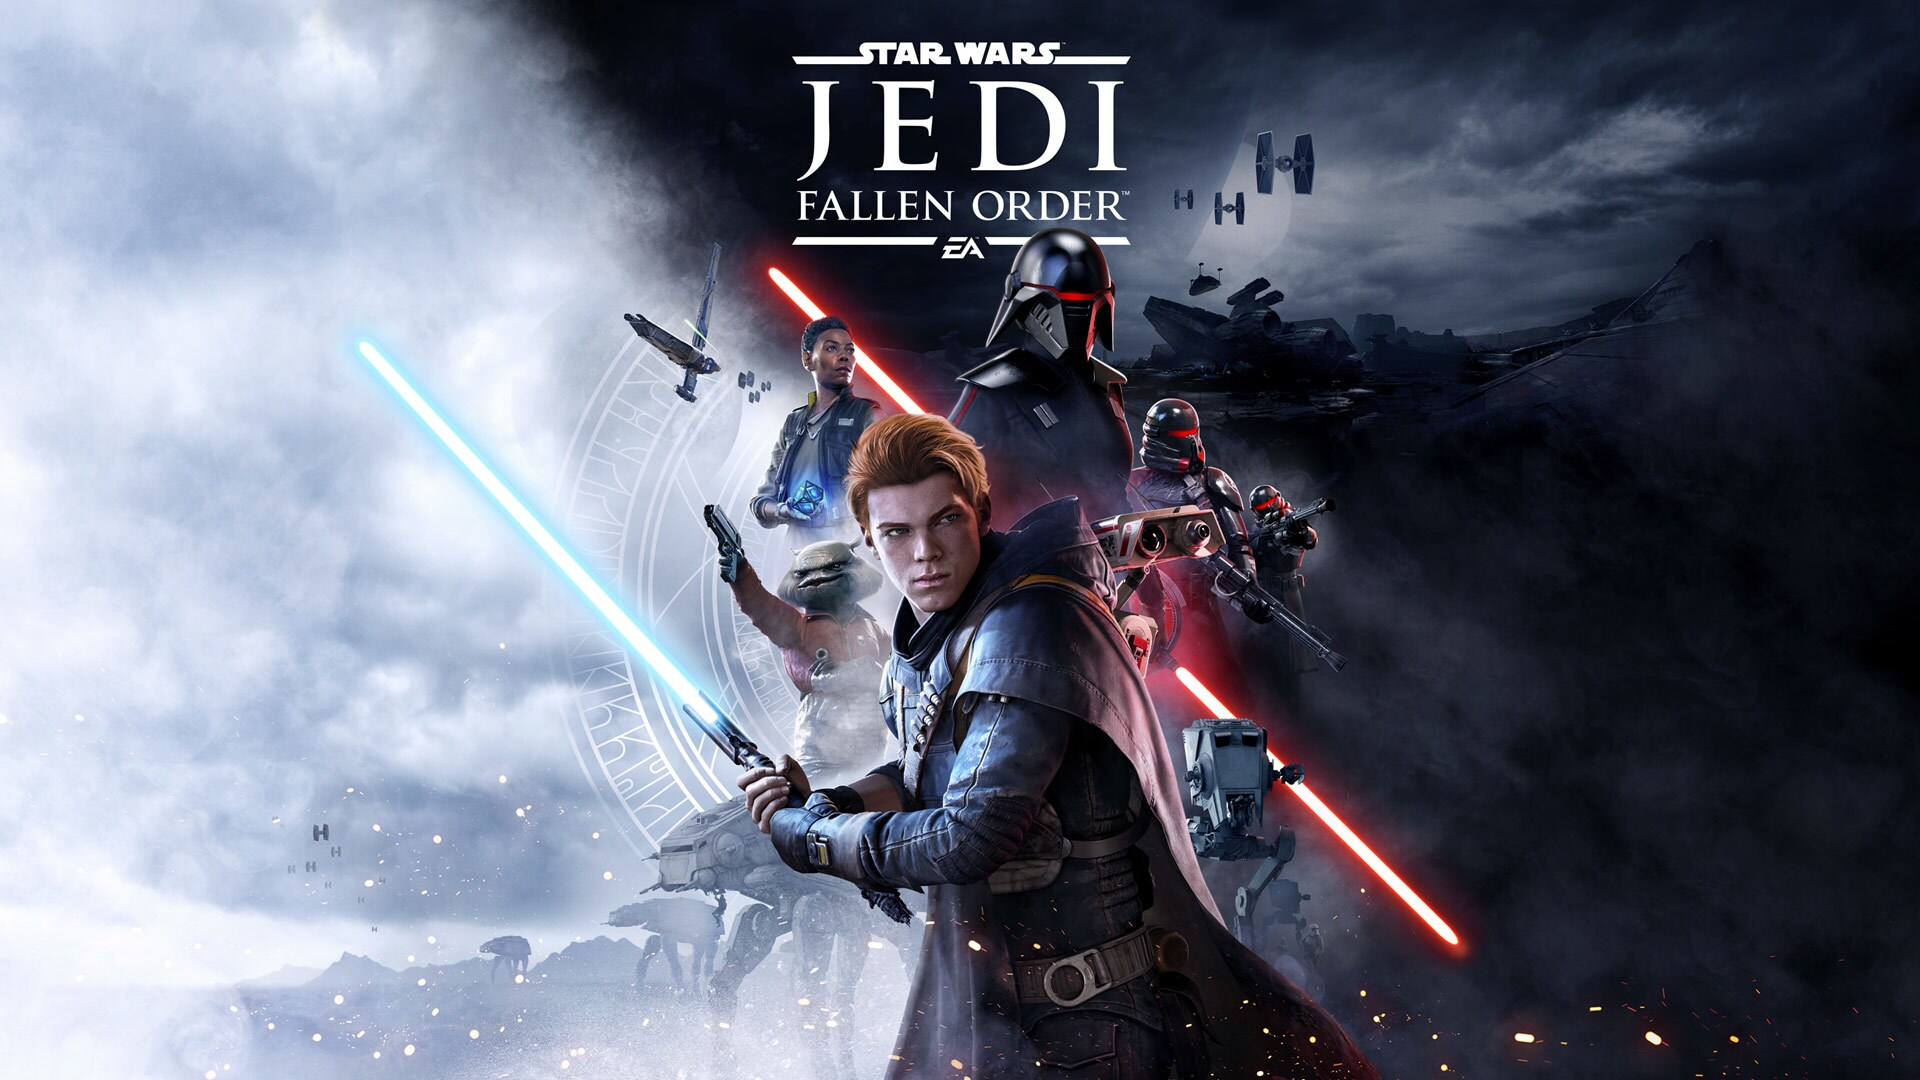 1920x1080 70+ Star Wars Jedi: Fallen Order HD Wallpapers and Backgrounds